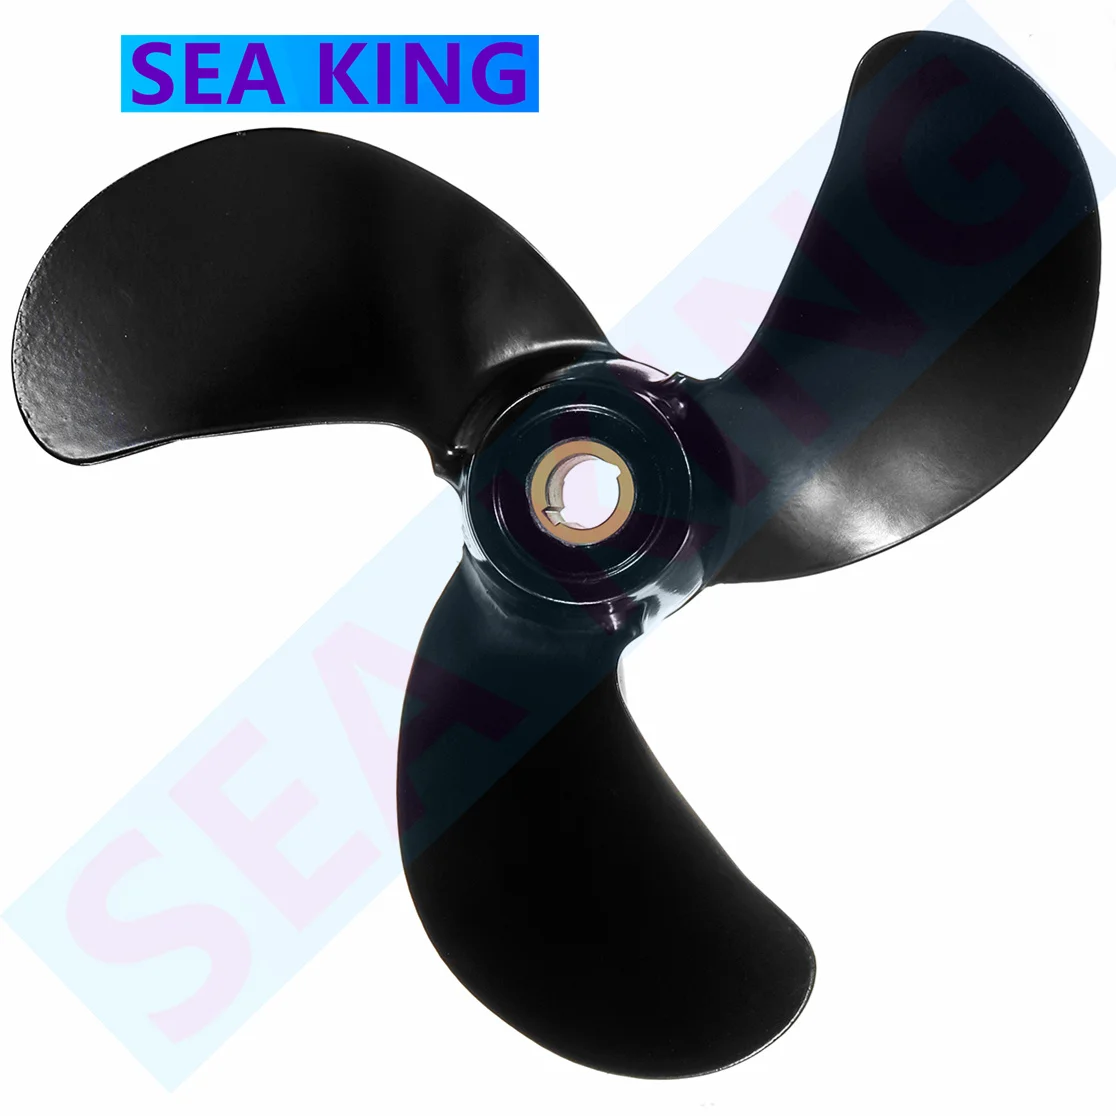 

6011-079-07P 7-7/8 x 7-1/2 Aluminum Alloy Boat Propeller For Honda Boat Outboard Engine 5HP 3 Blade Black R Rotation Accessories